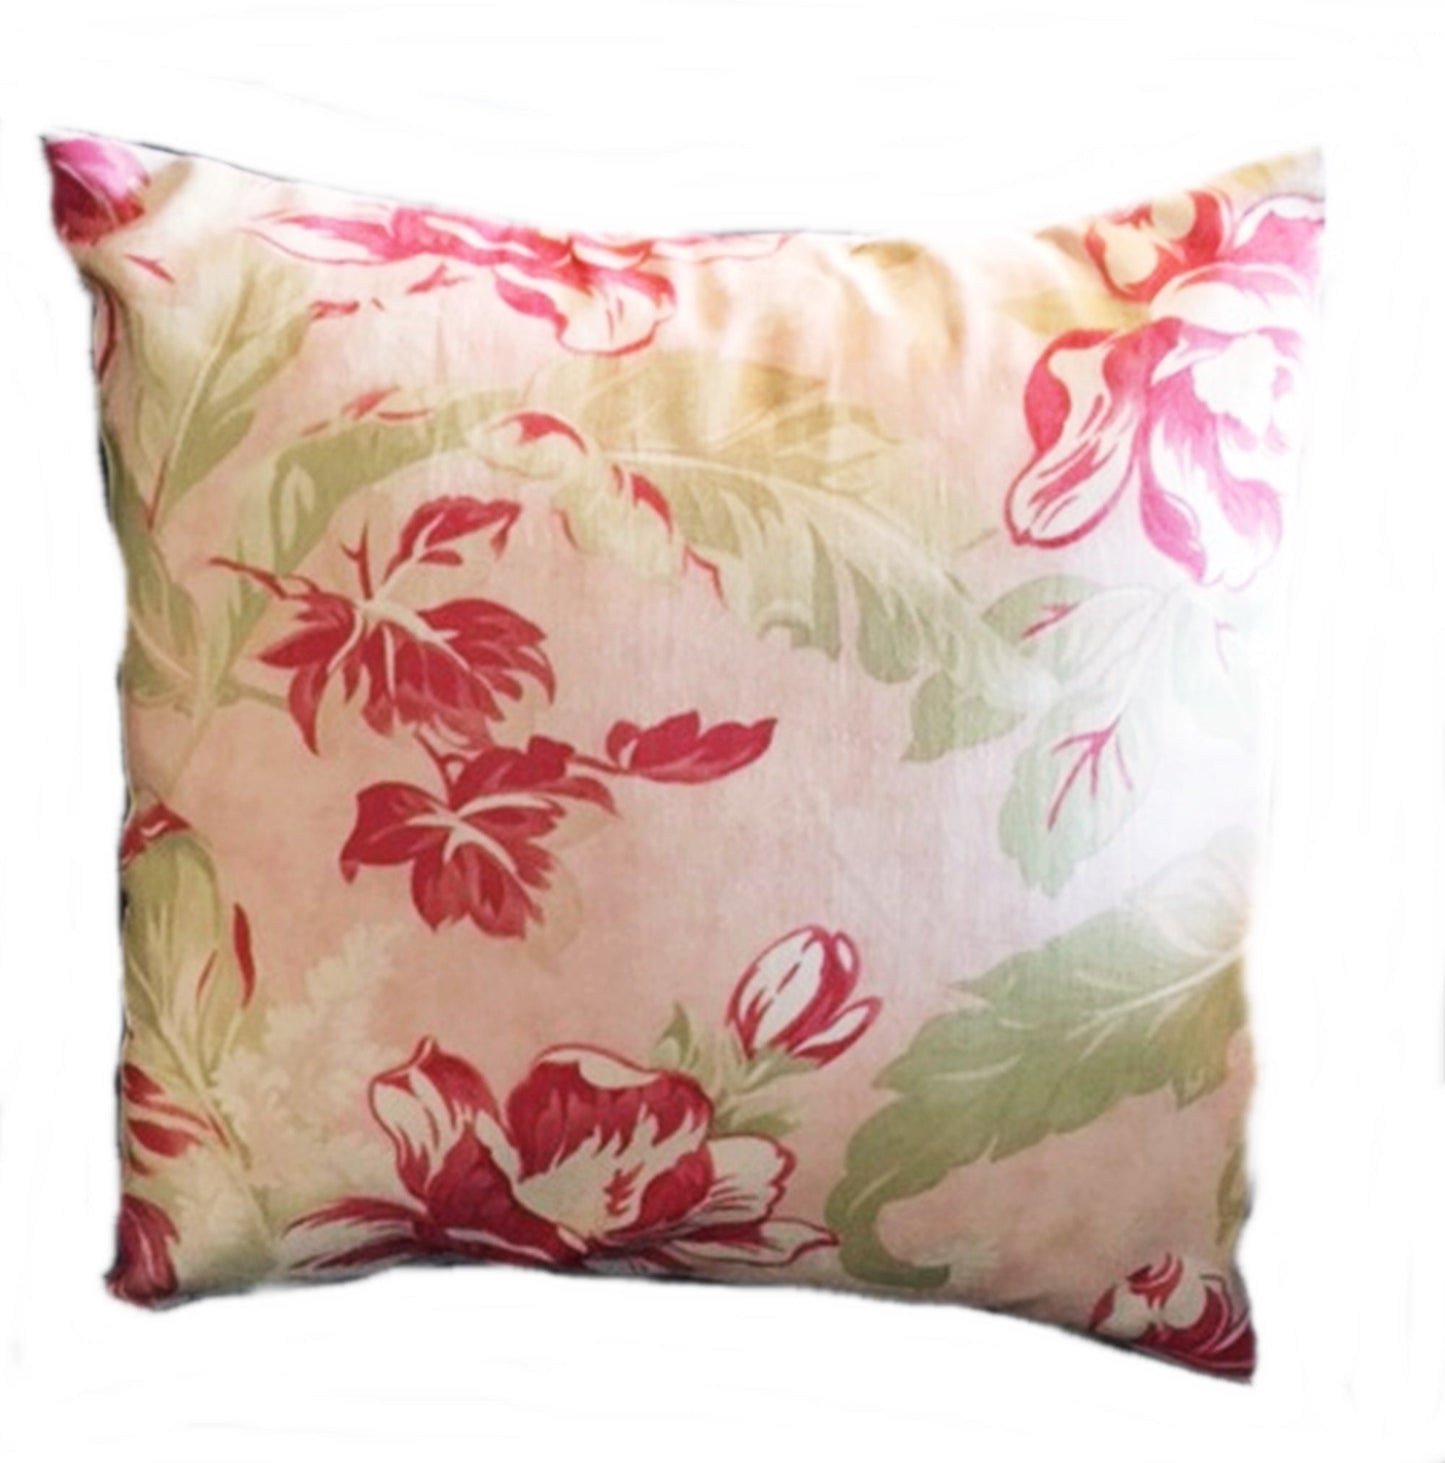 Throw Pillow Cover | Seaside Rose Cottage Chic fabric | Home Decor Accessory